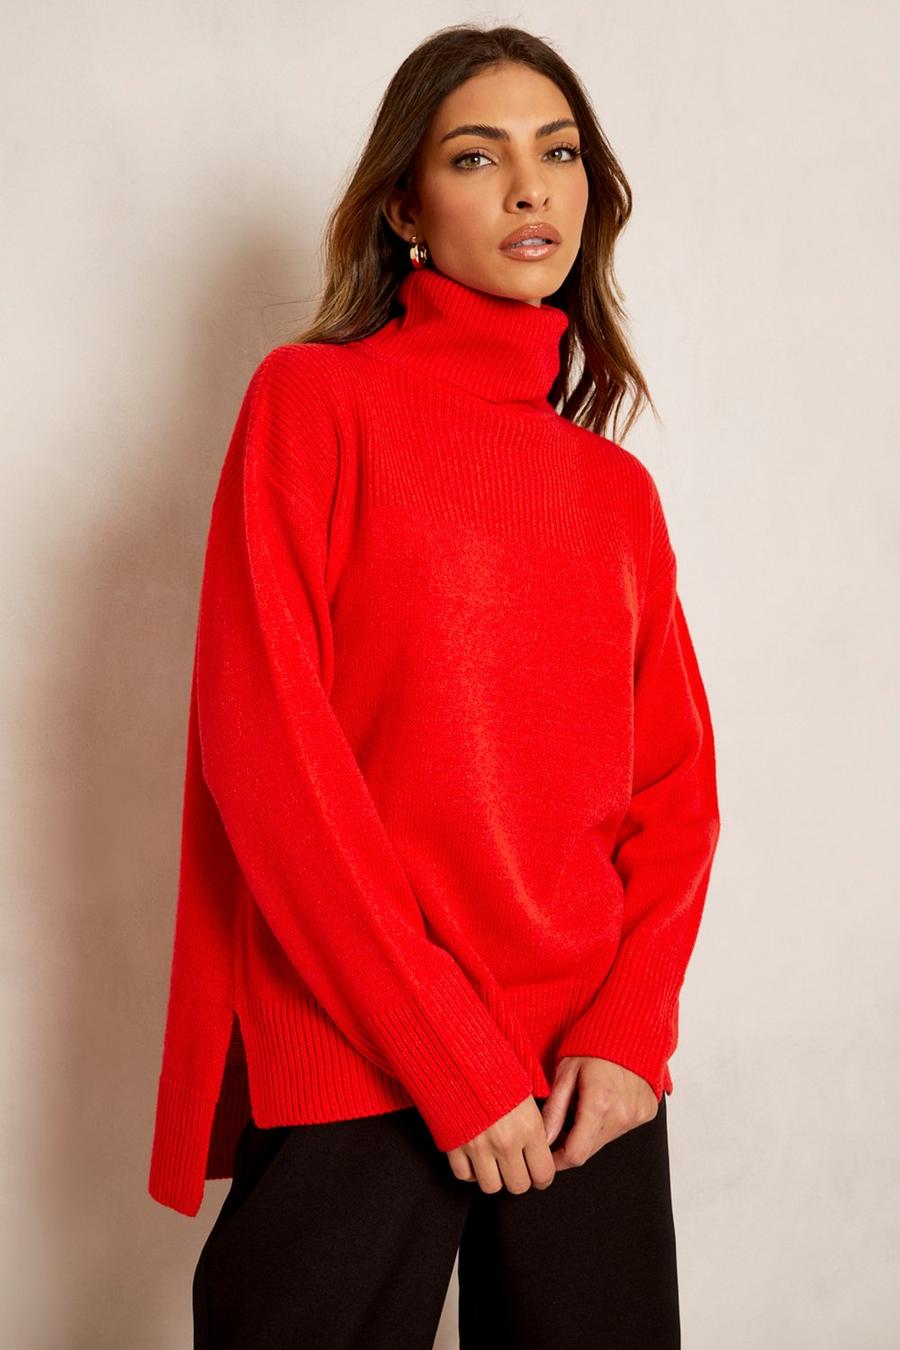 Wine red Recycled Turtleneck Tunic Sweater